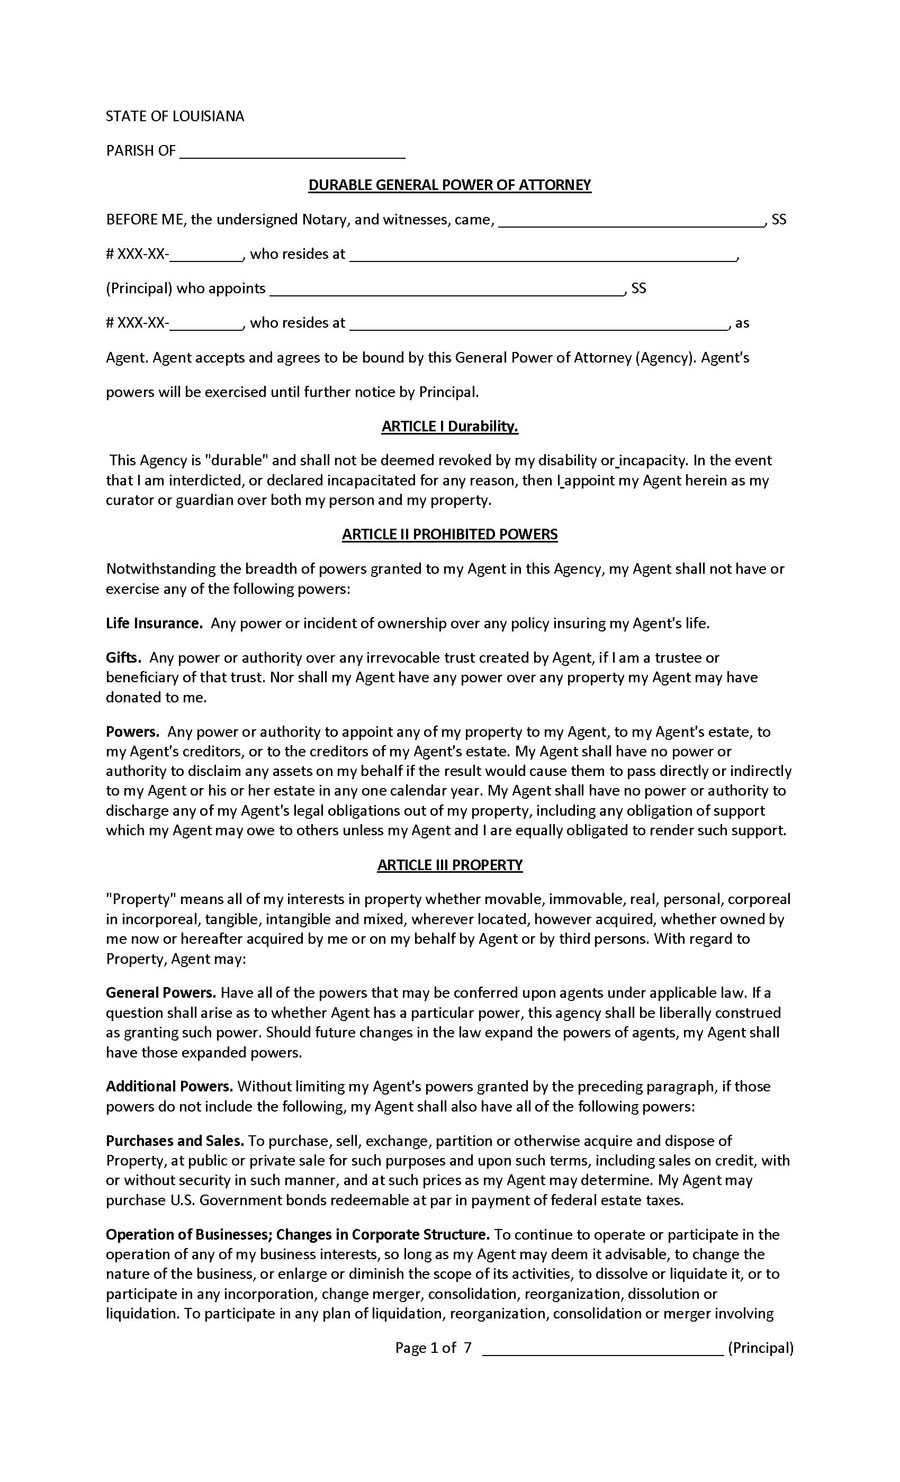 Louisiana Power of Attorney Form - Free Download